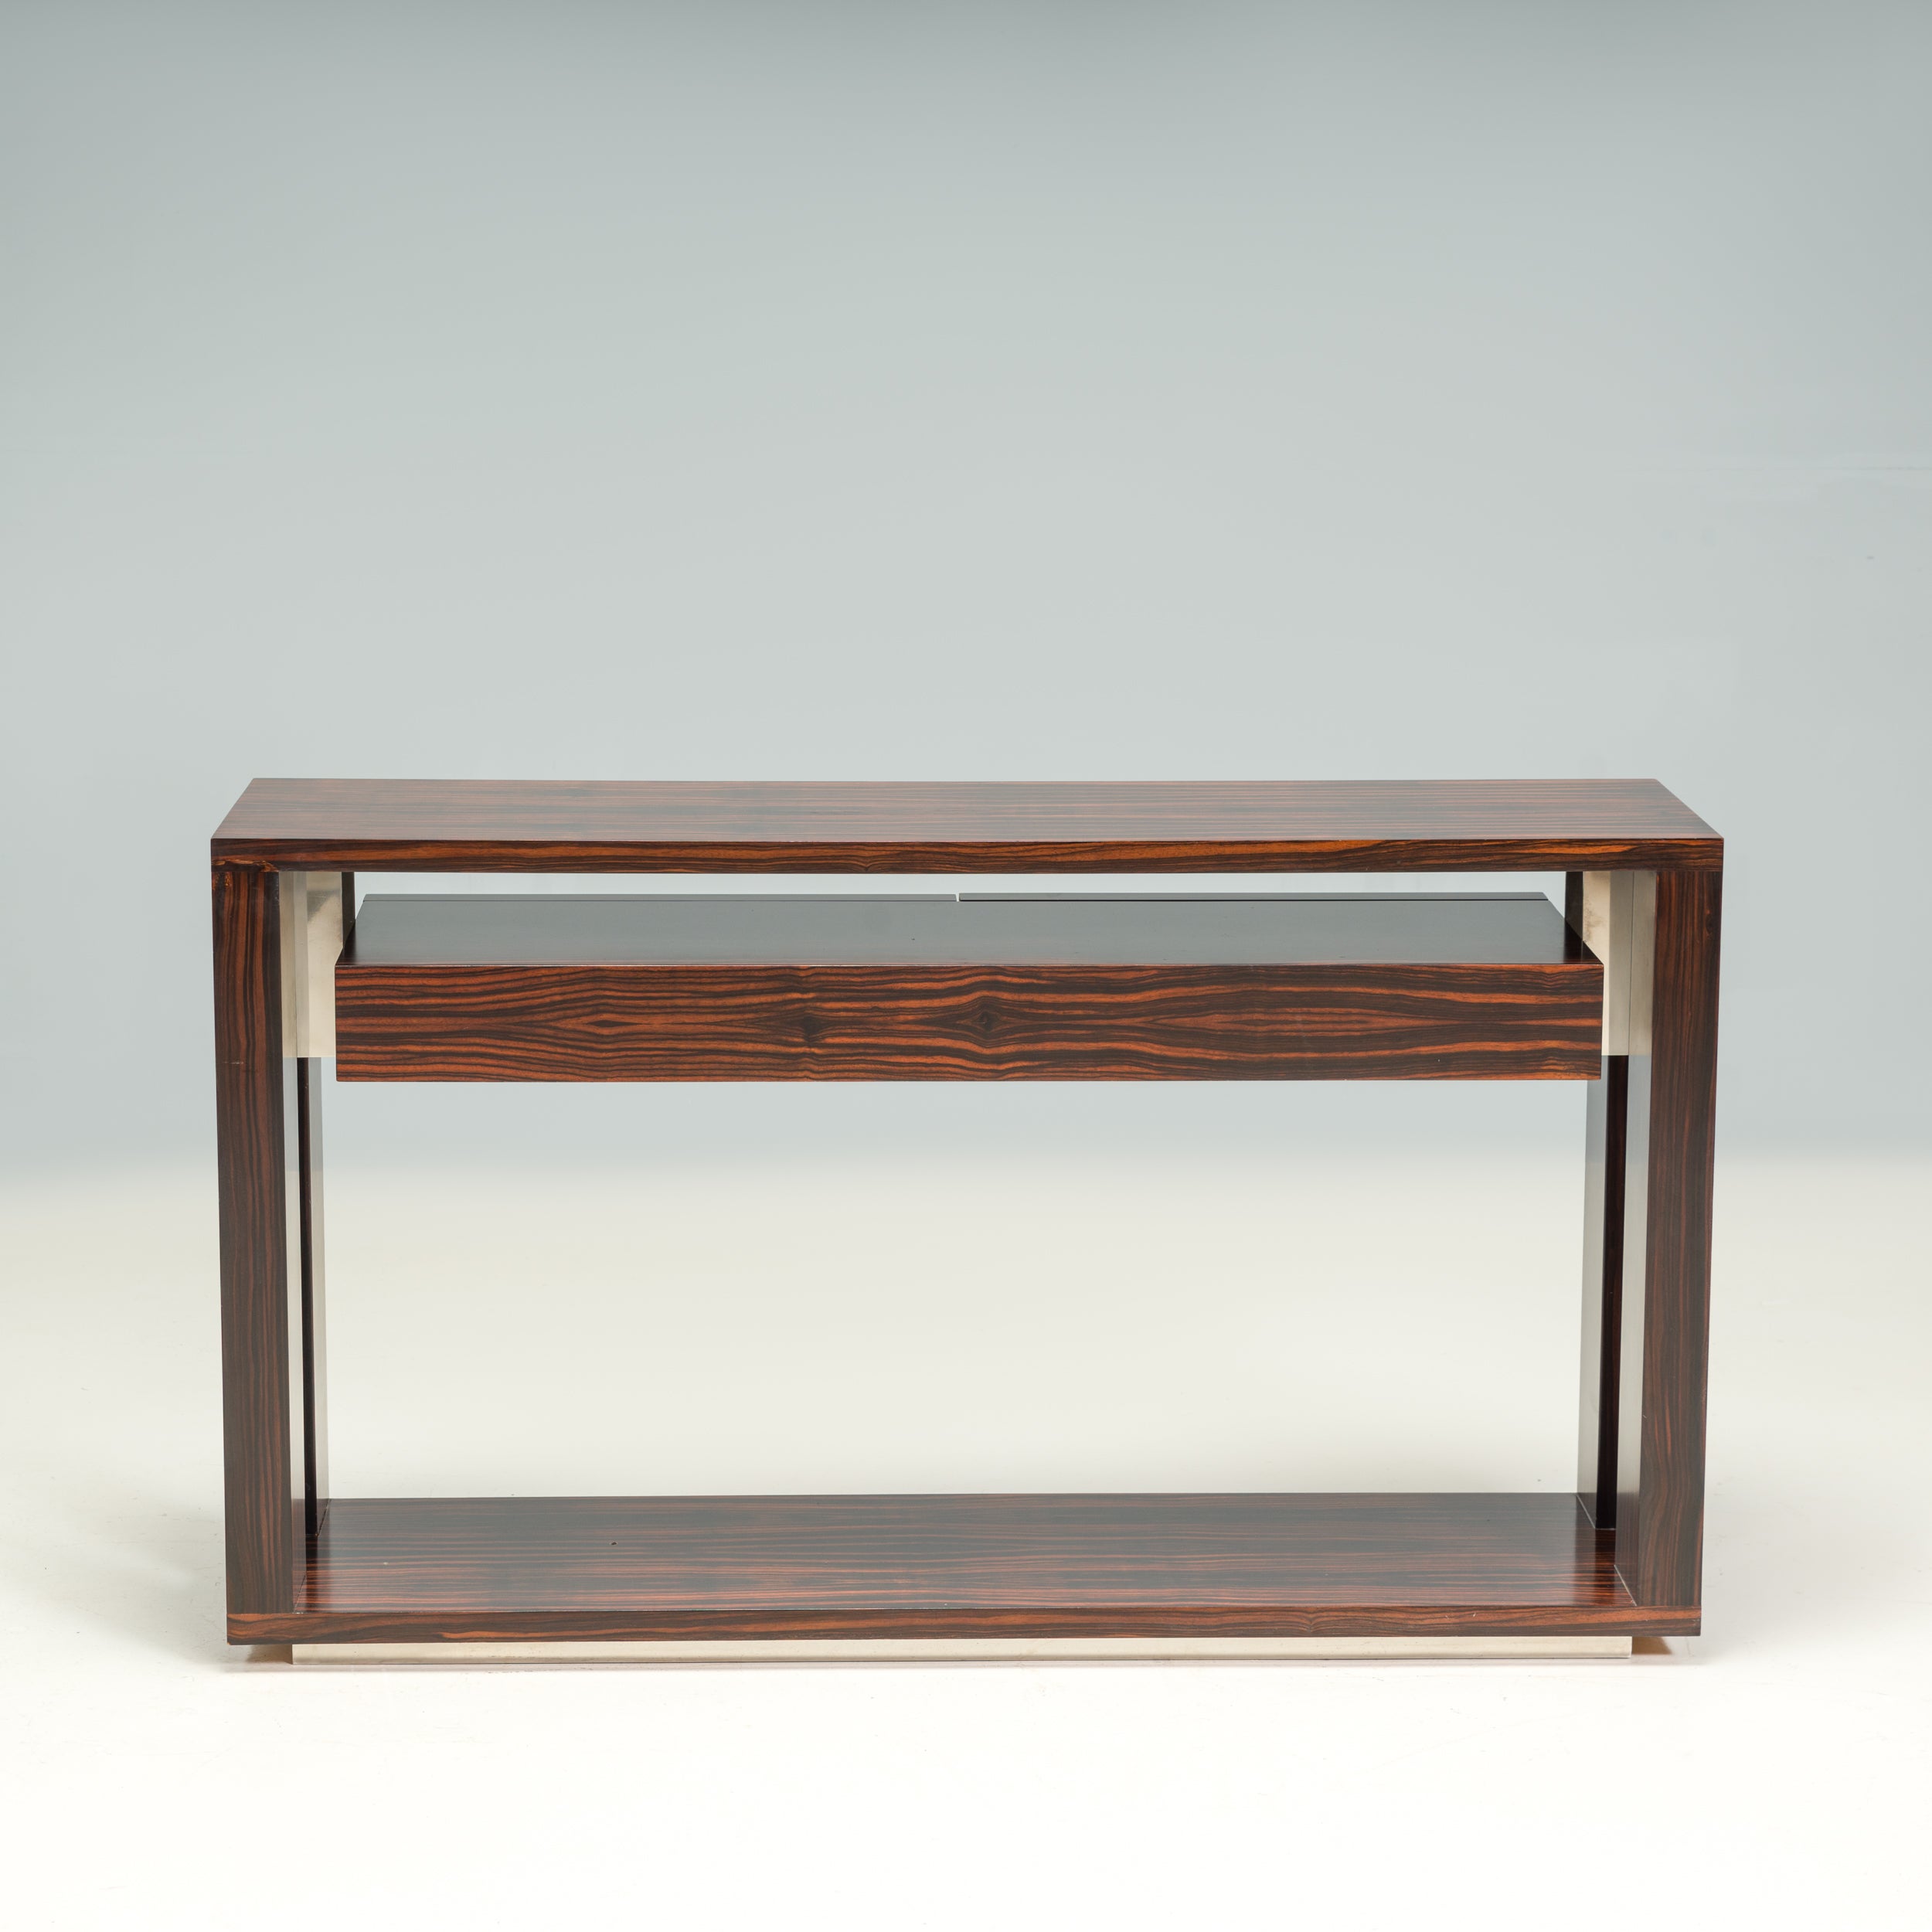 Designed and manufactured by B&B Italia, this Eucalipto console table is a fantastic example of contemporary Italian design.

Constructed from wood with a glossy frisé eucalyptus veneer finish, the console table has an angular silhouette, with four